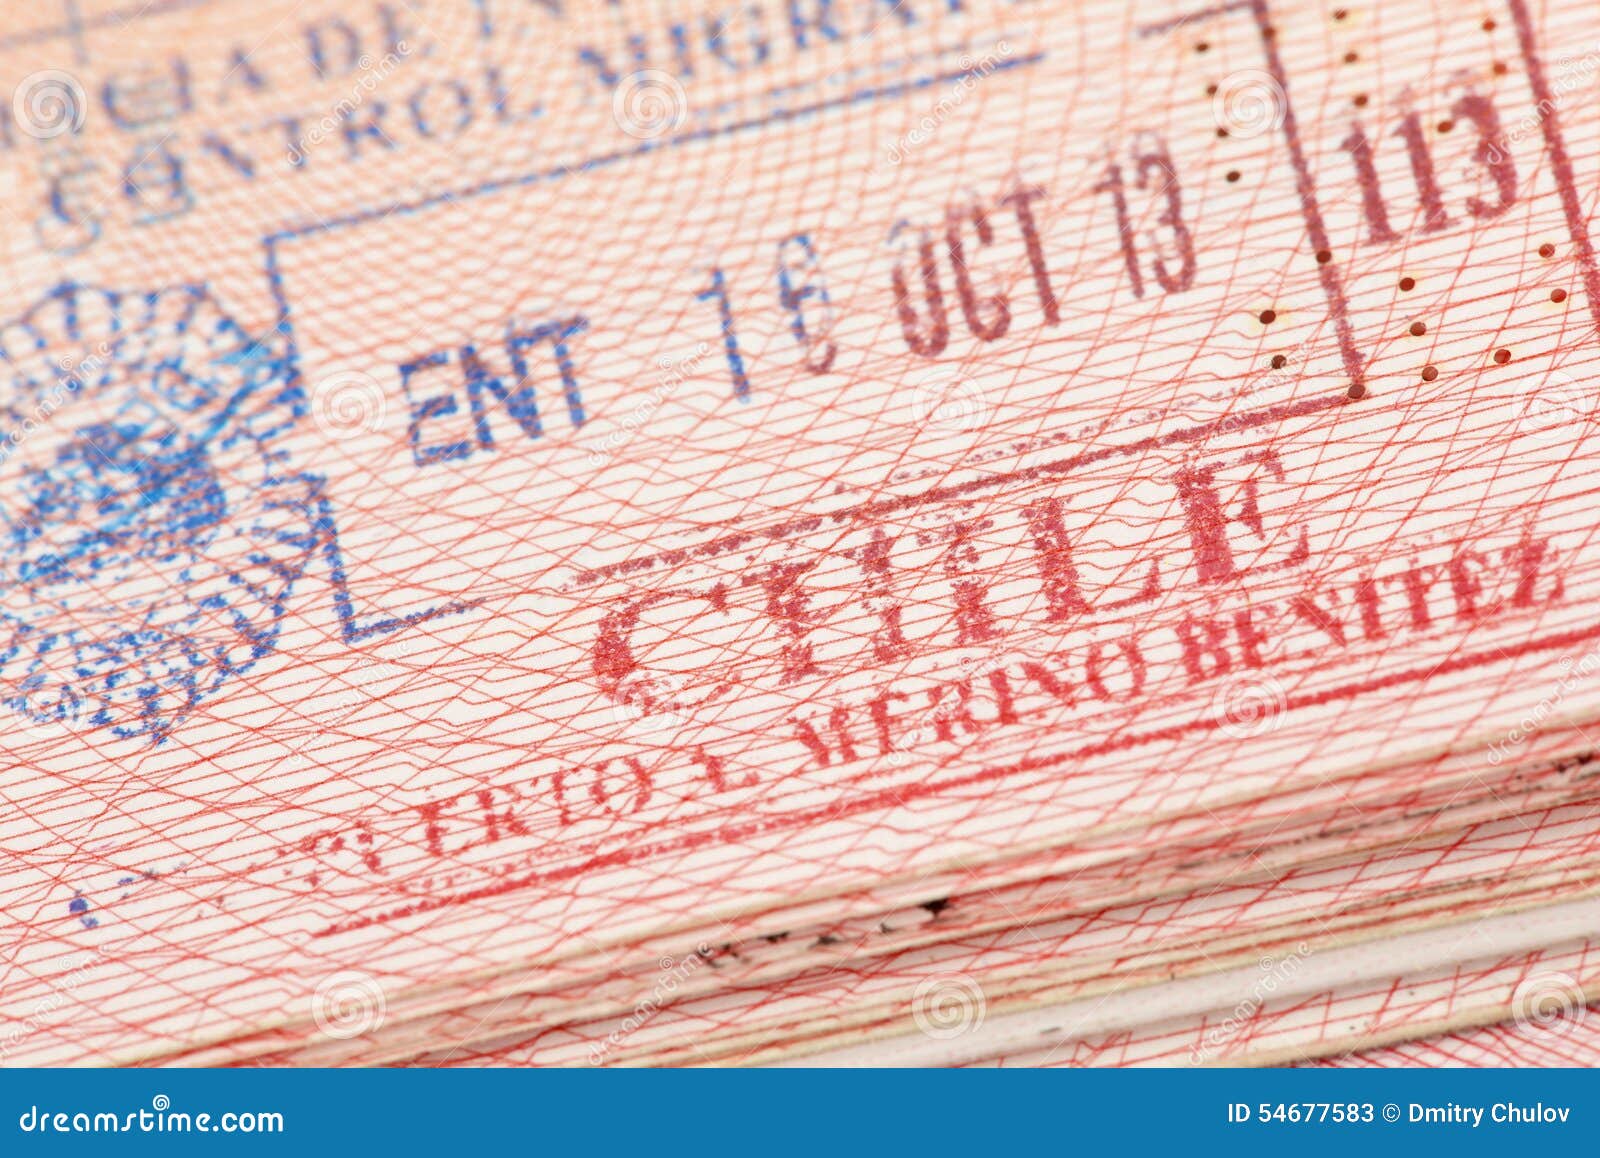 passport page with chile immigration control entry stamp.